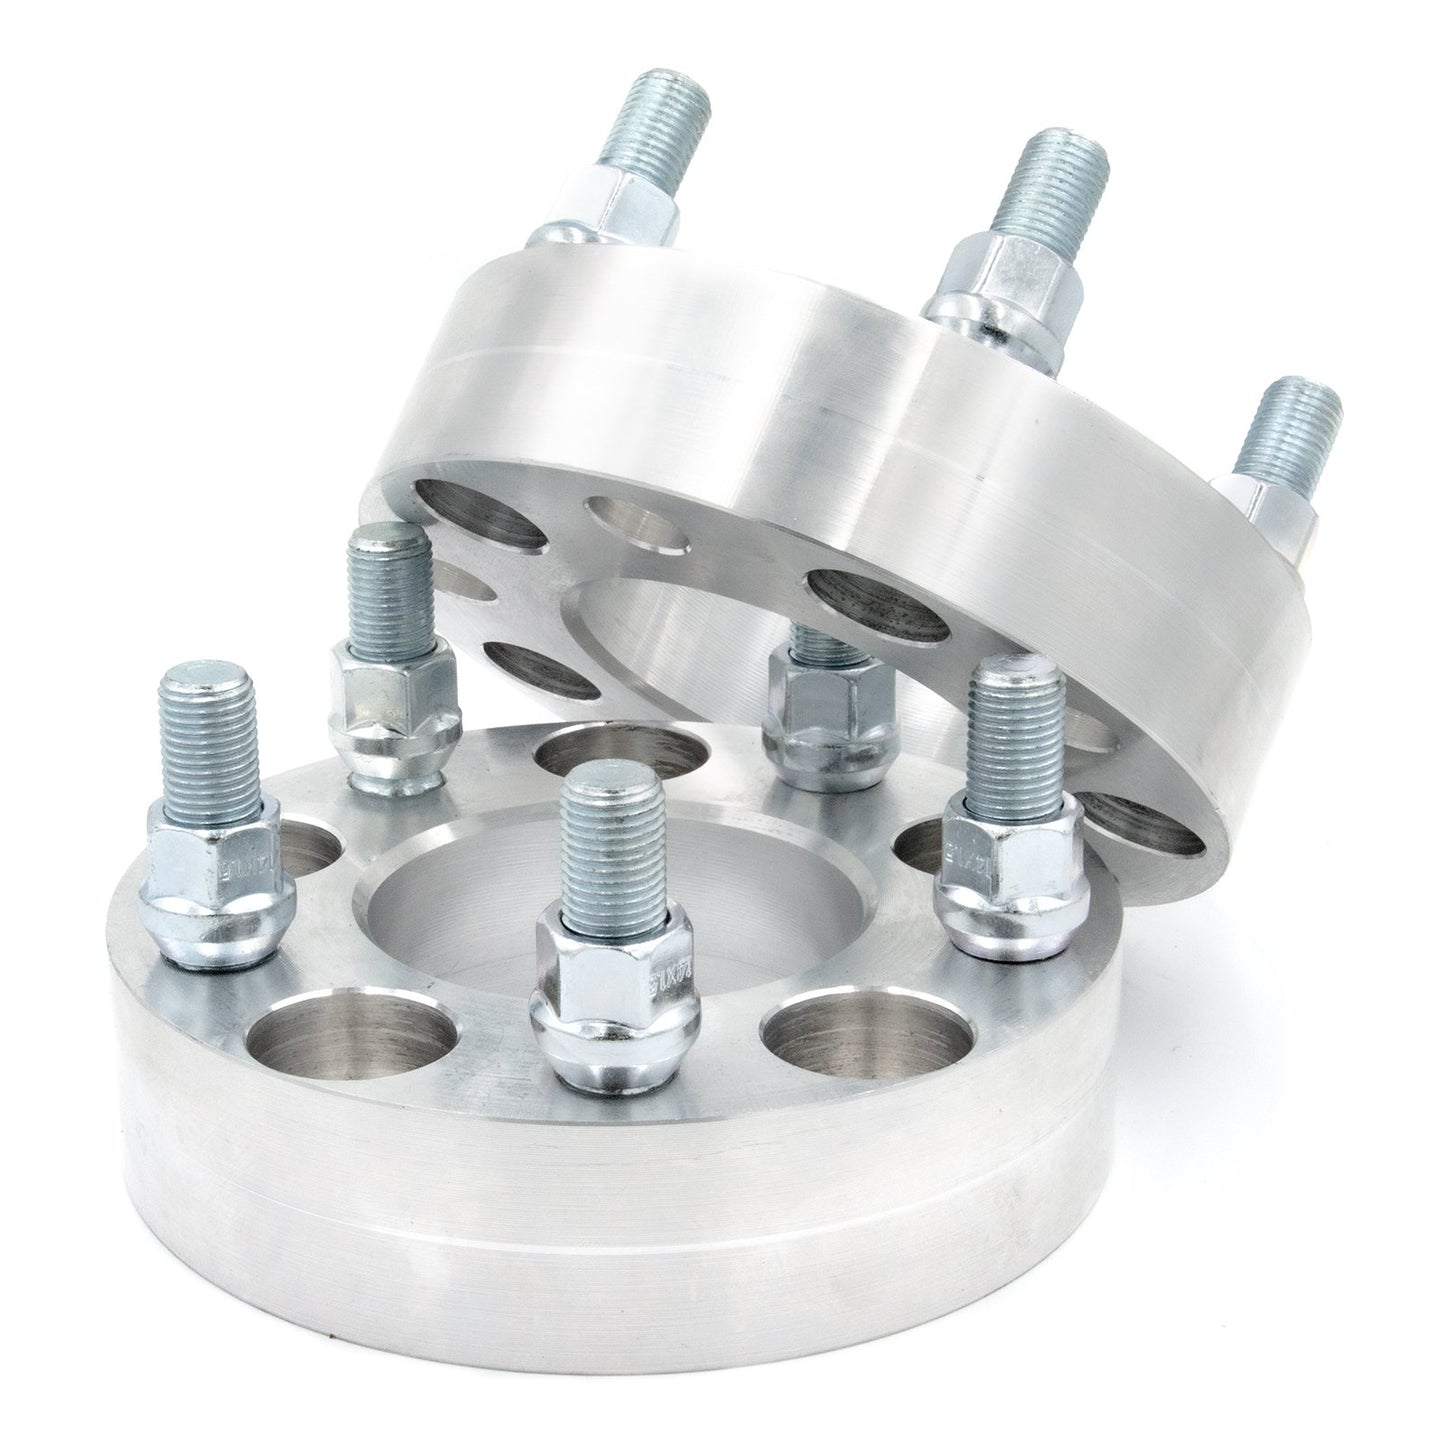 5x120 to 5x135 Wheel Spacer/Adapter - Thickness: 3/4"- 4"